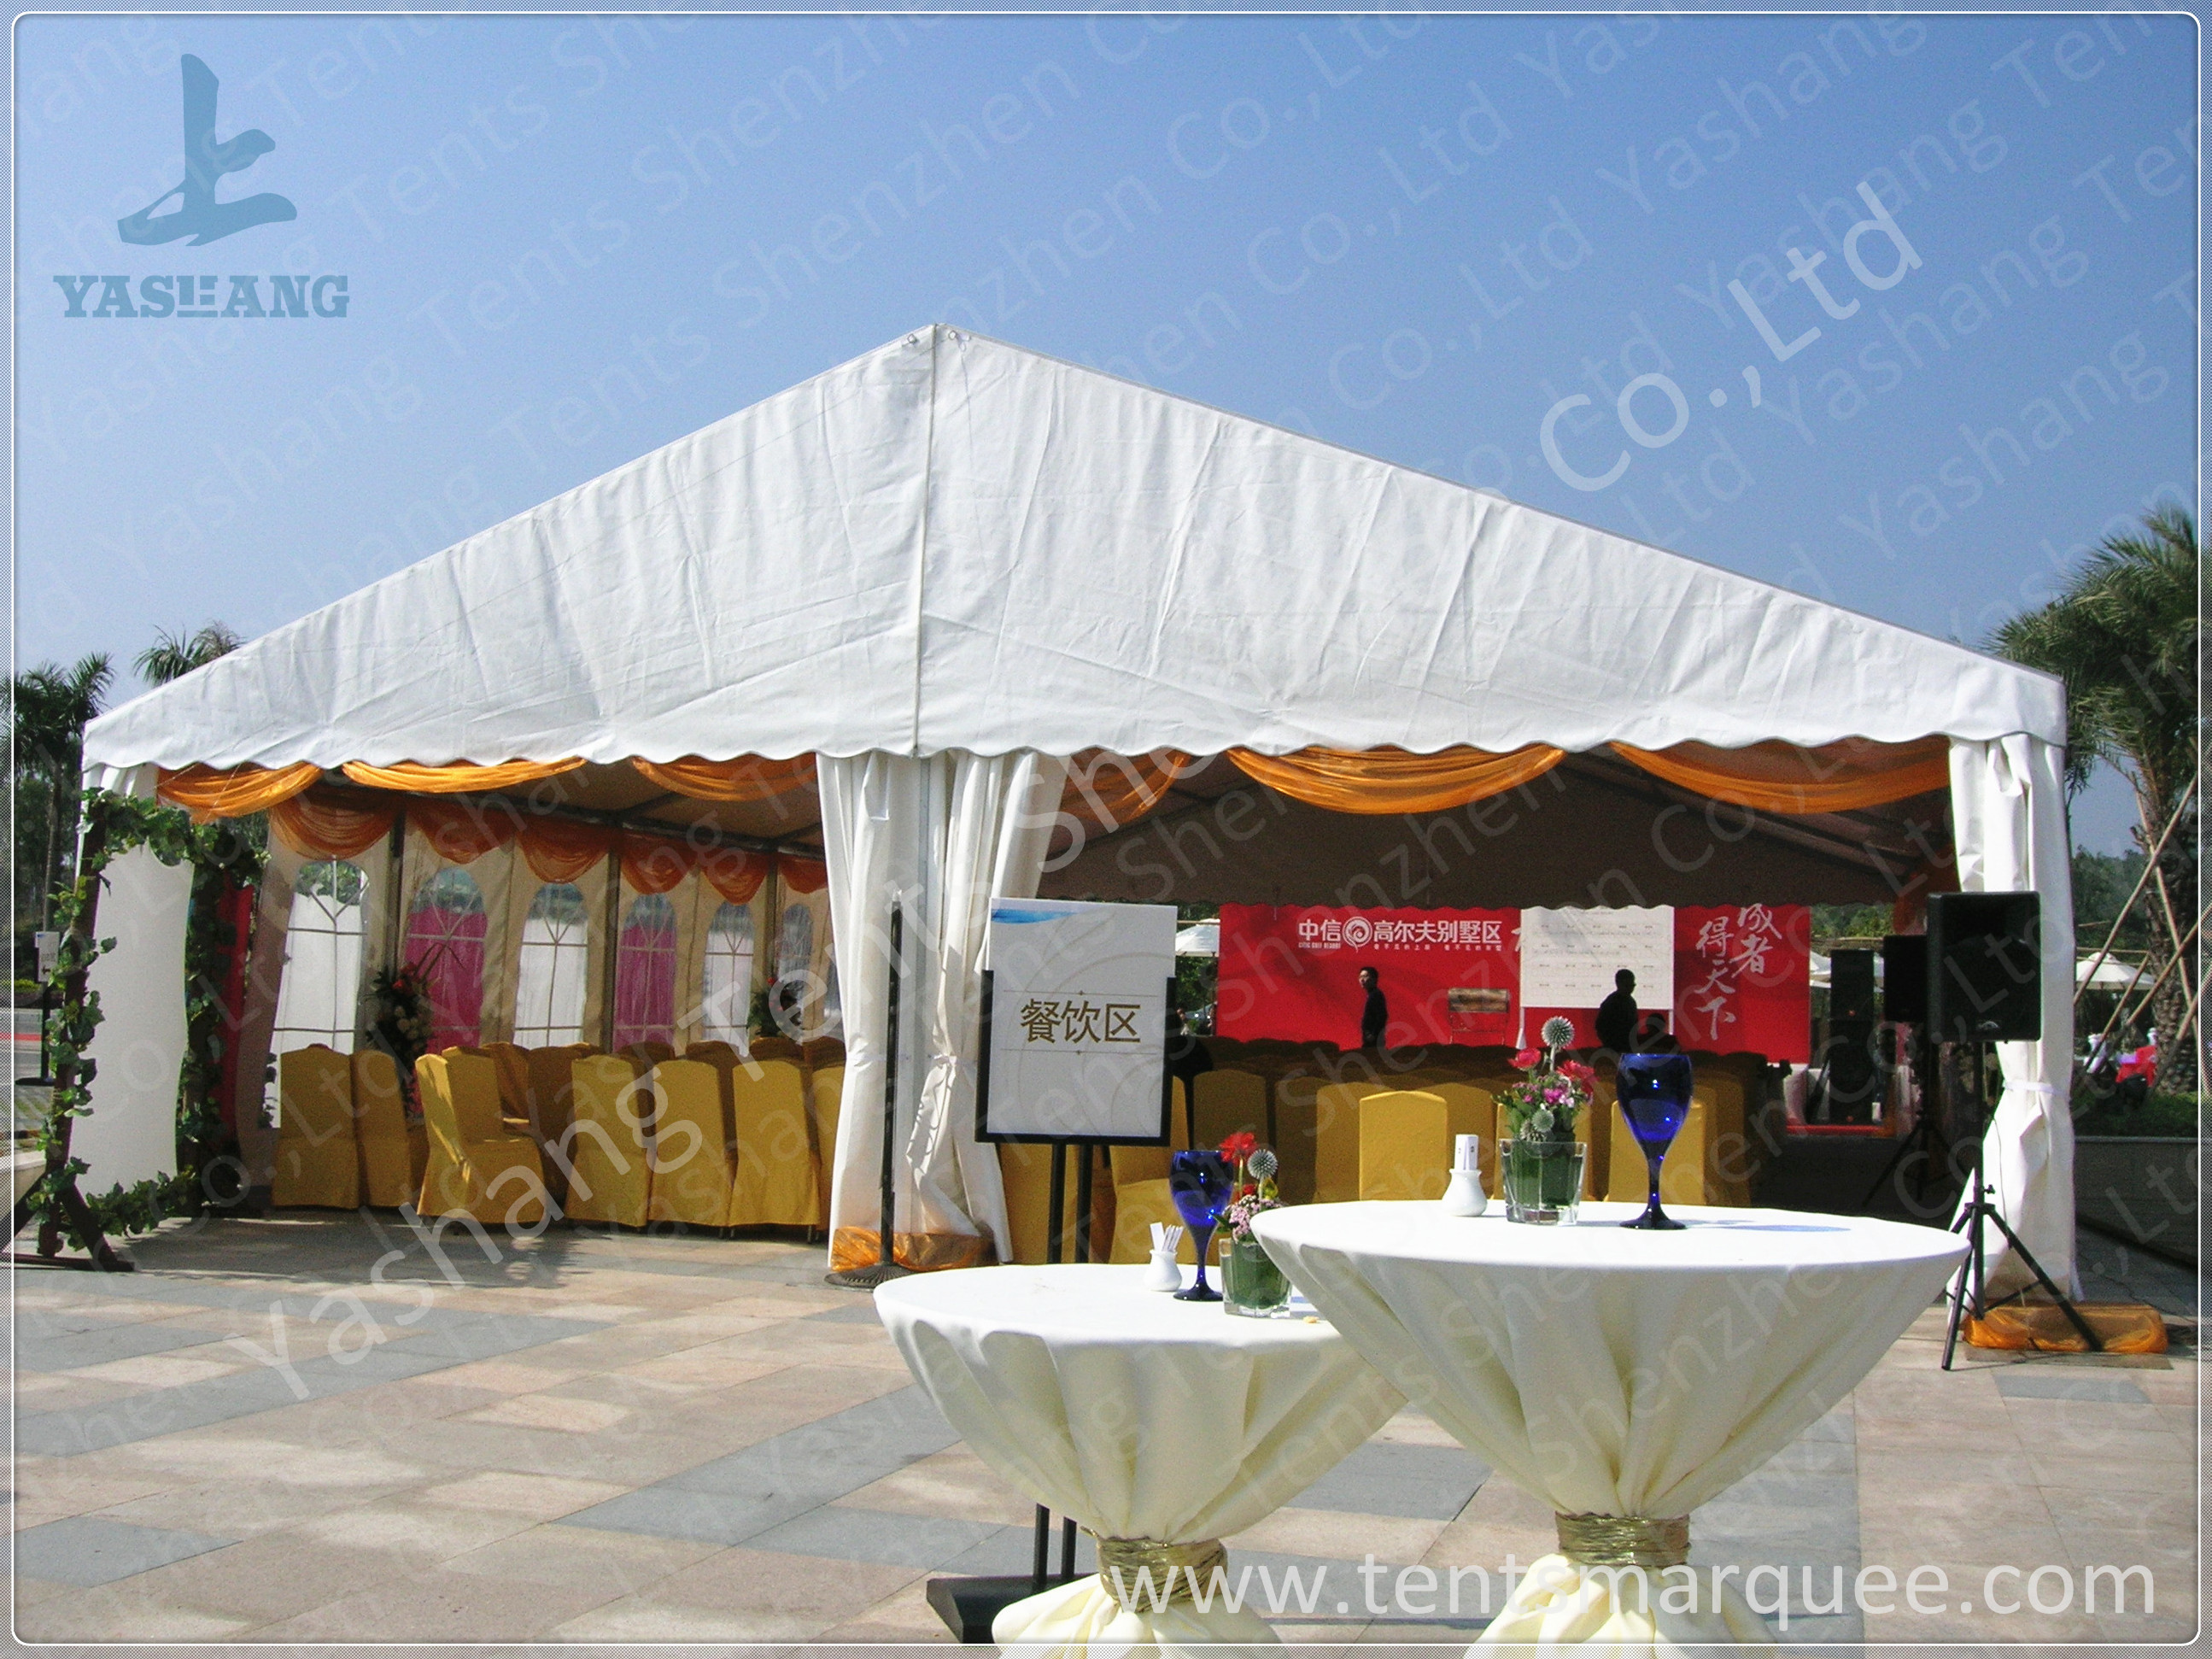 White Roof Cover outside event tents for Golf Villas Sales Conference with orange ripples